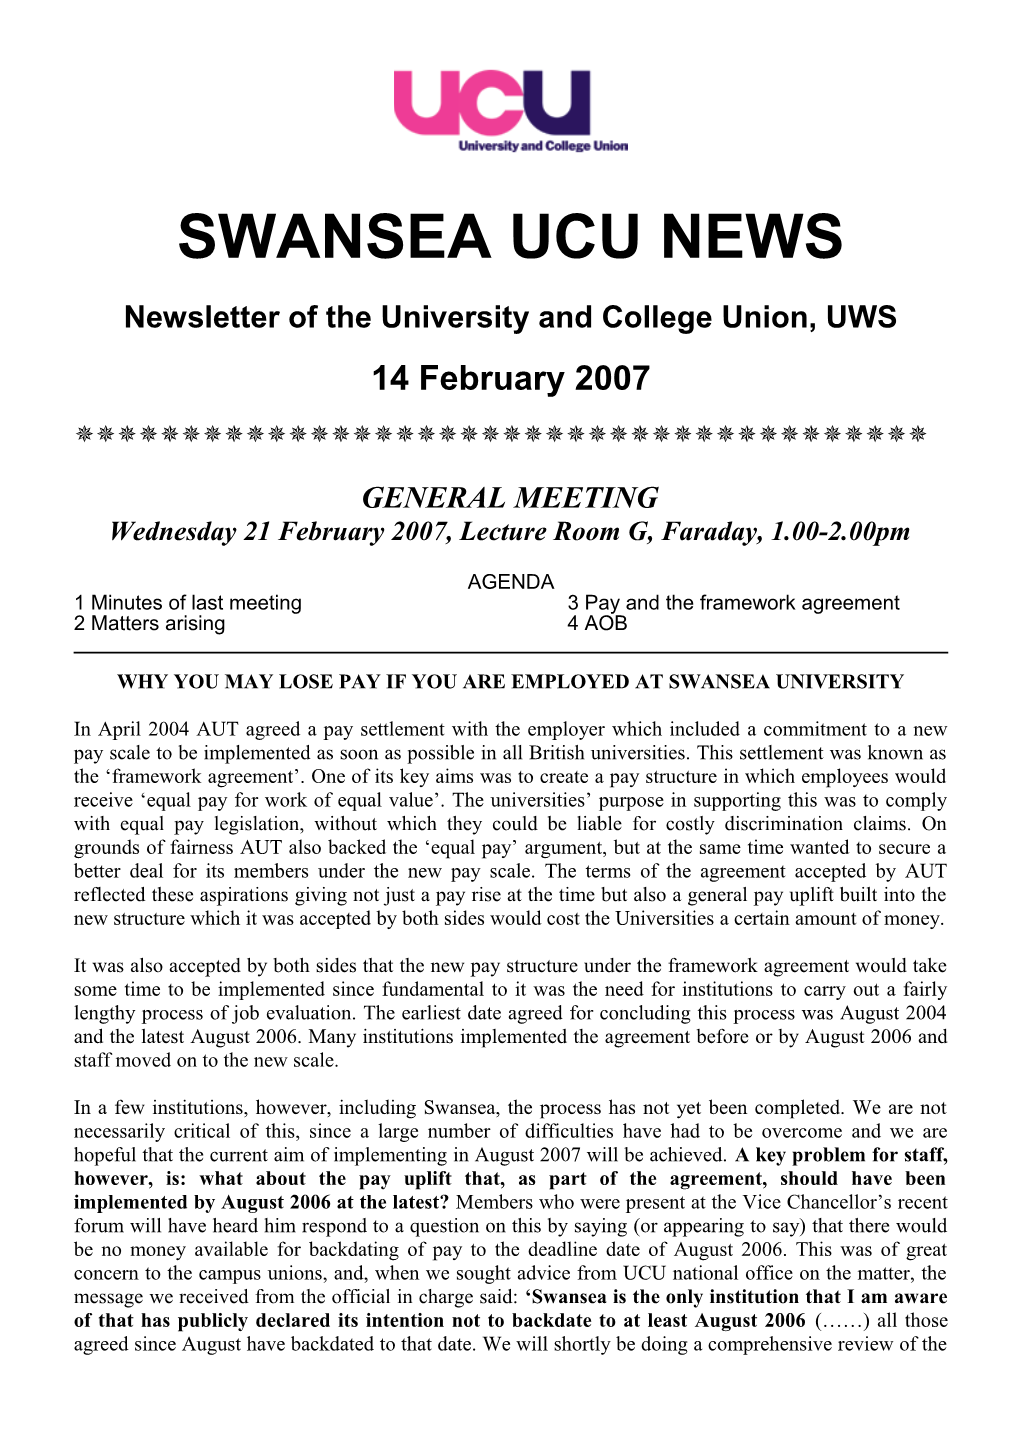 Newsletter of the University and College Union, UWS